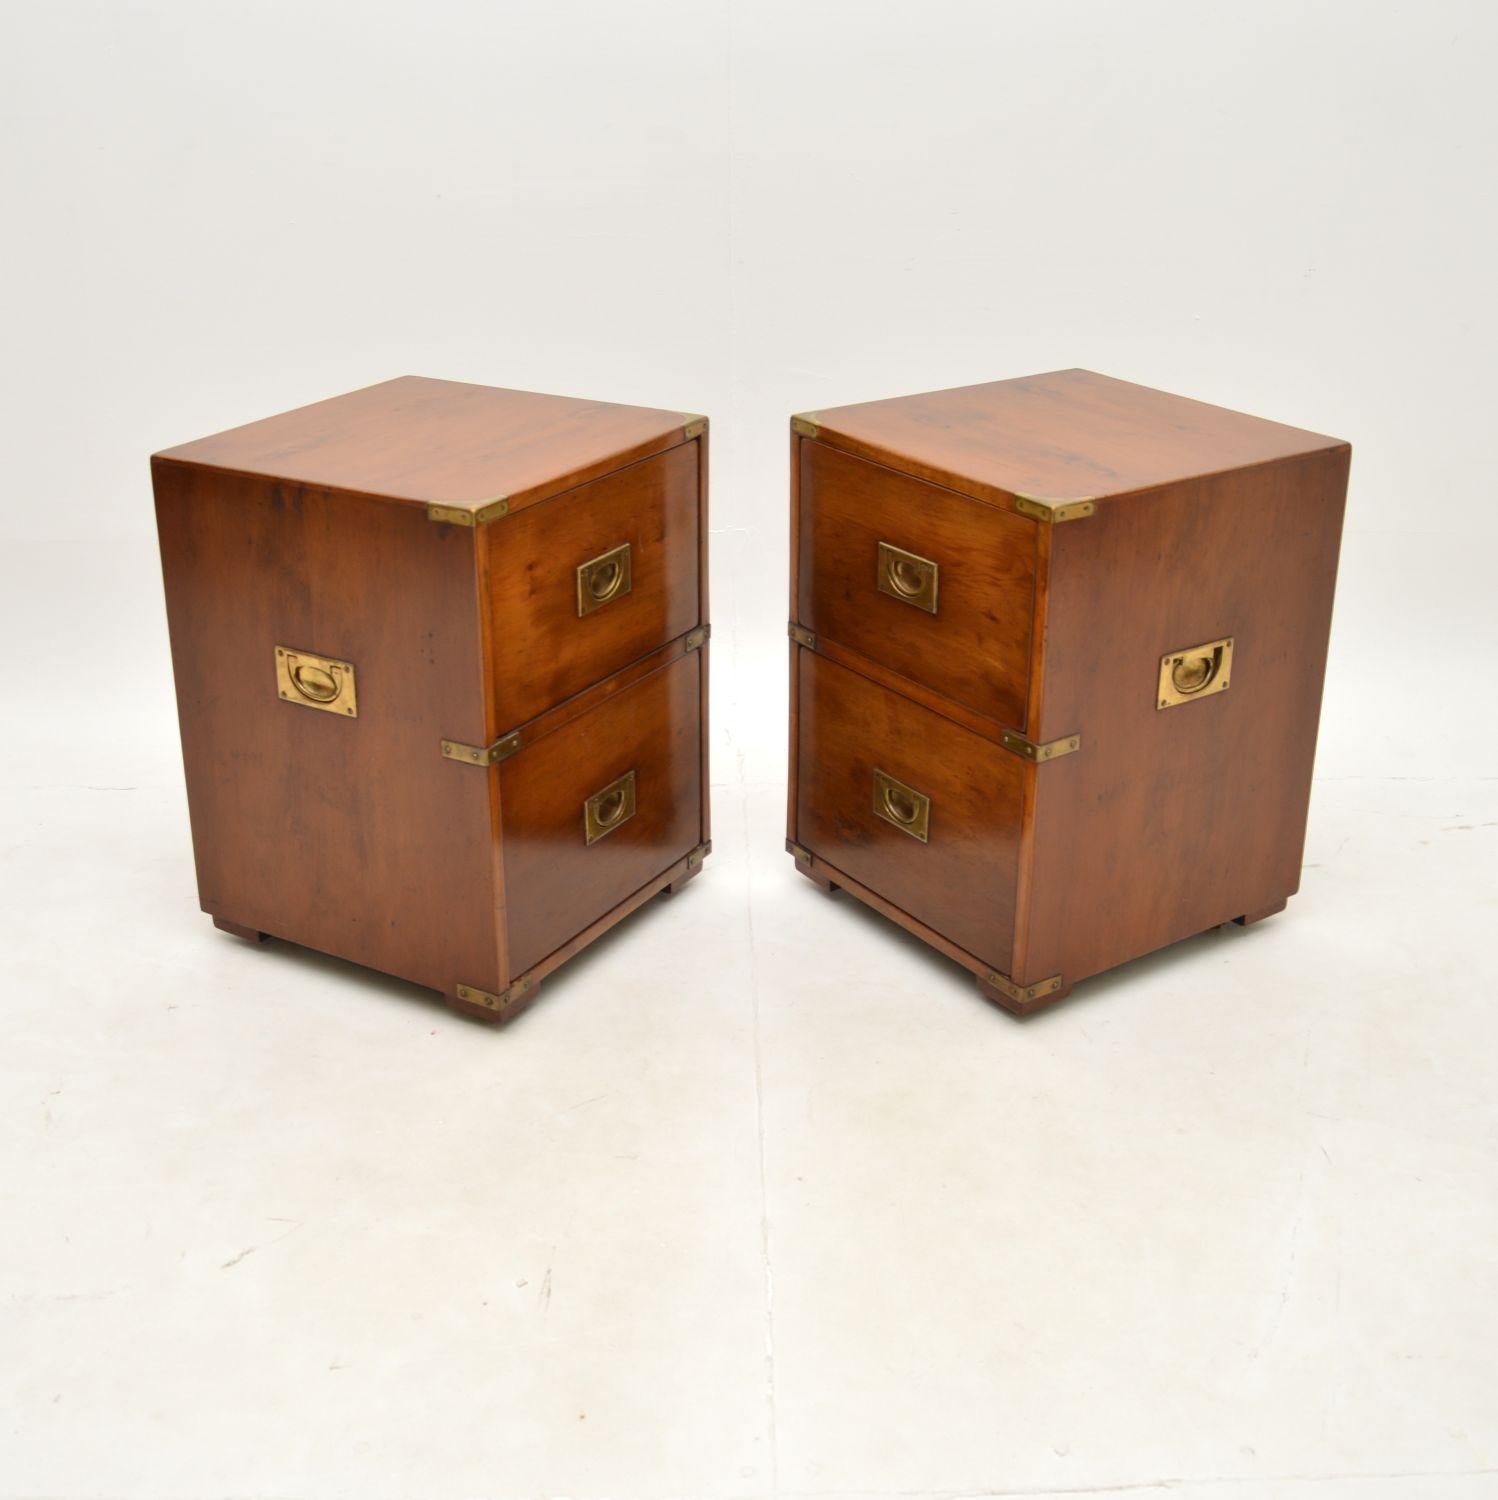 British Pair of Antique Yew Wood Military Campaign Bedside Chests